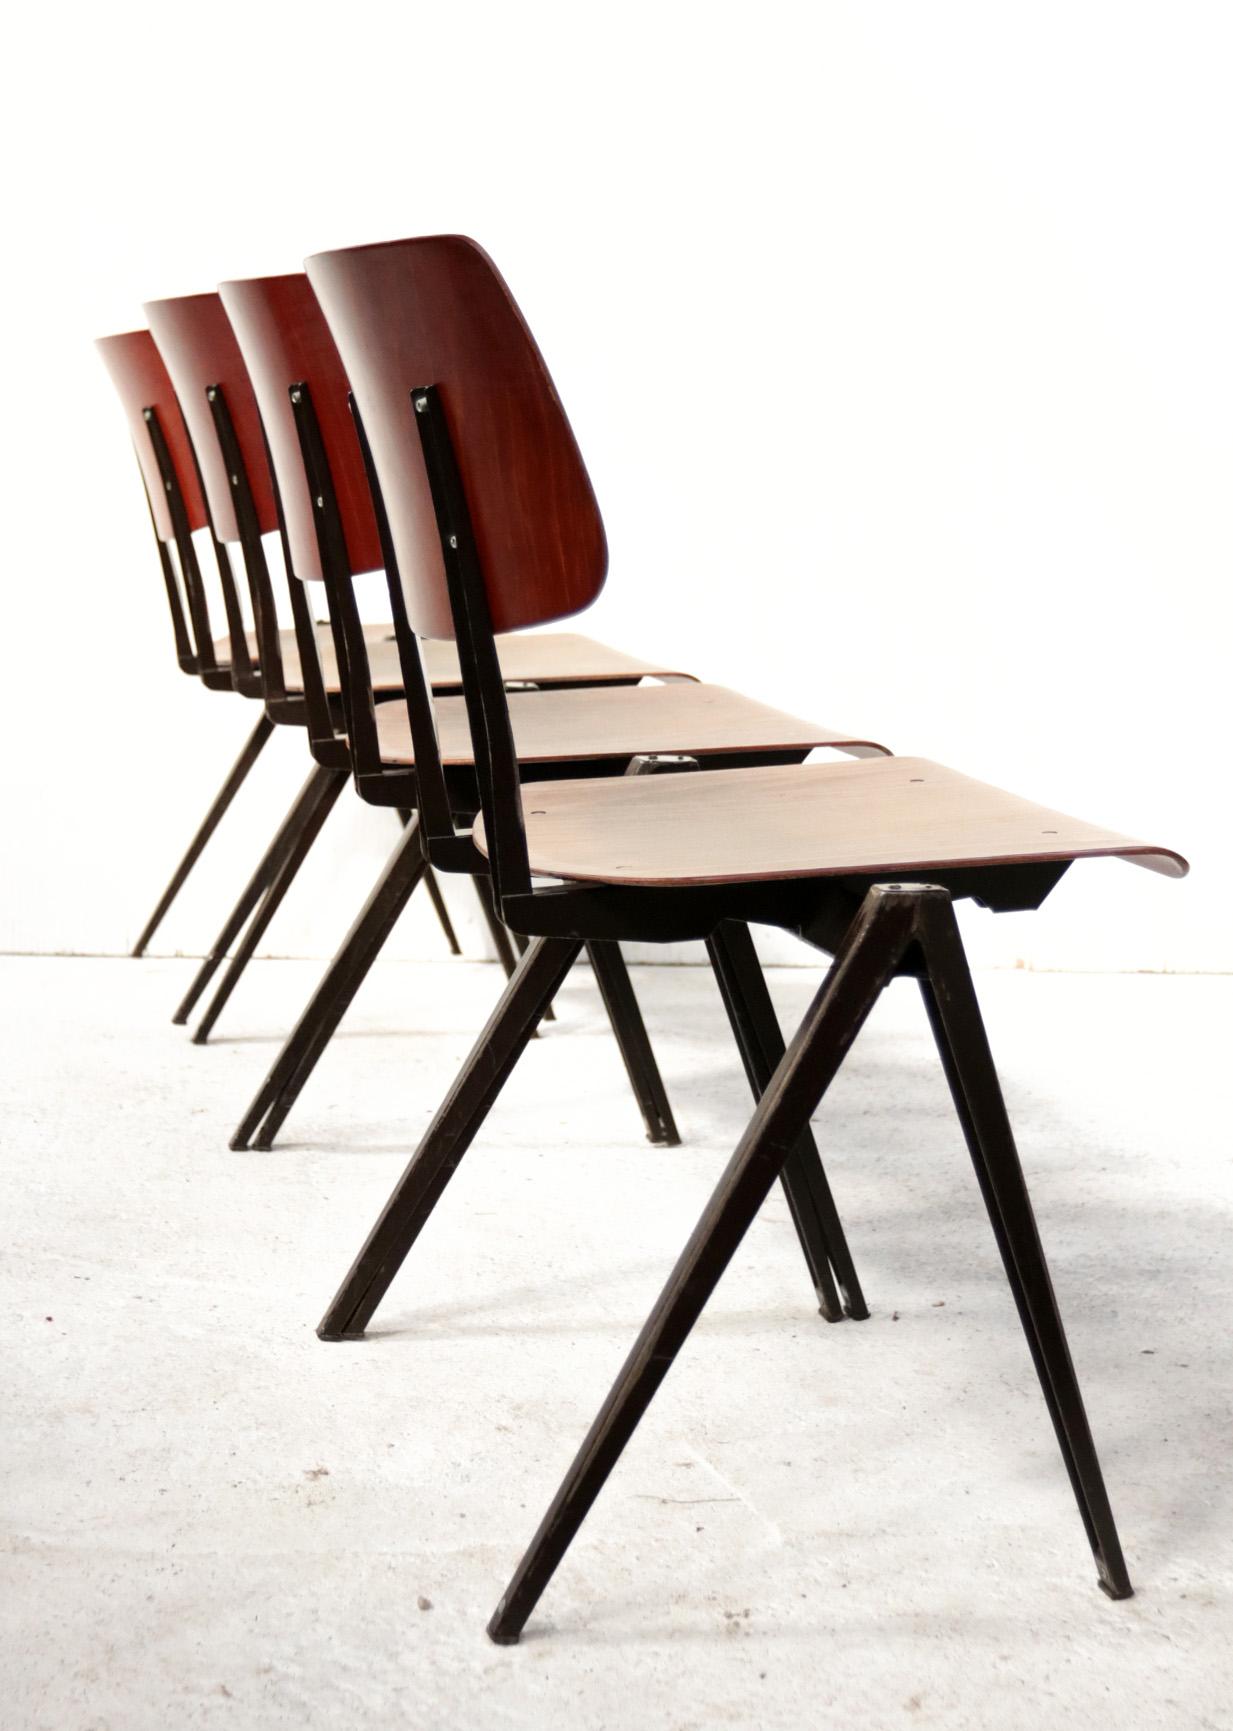 Nice batch of original S21 stackable and switchable school chairs made by Galvanitas from the 60s - 70s in the style of the designs of Friso Kramer, Wim Rietveld and Jean Prouvé.
What makes these seats very special is the way you switch them. You